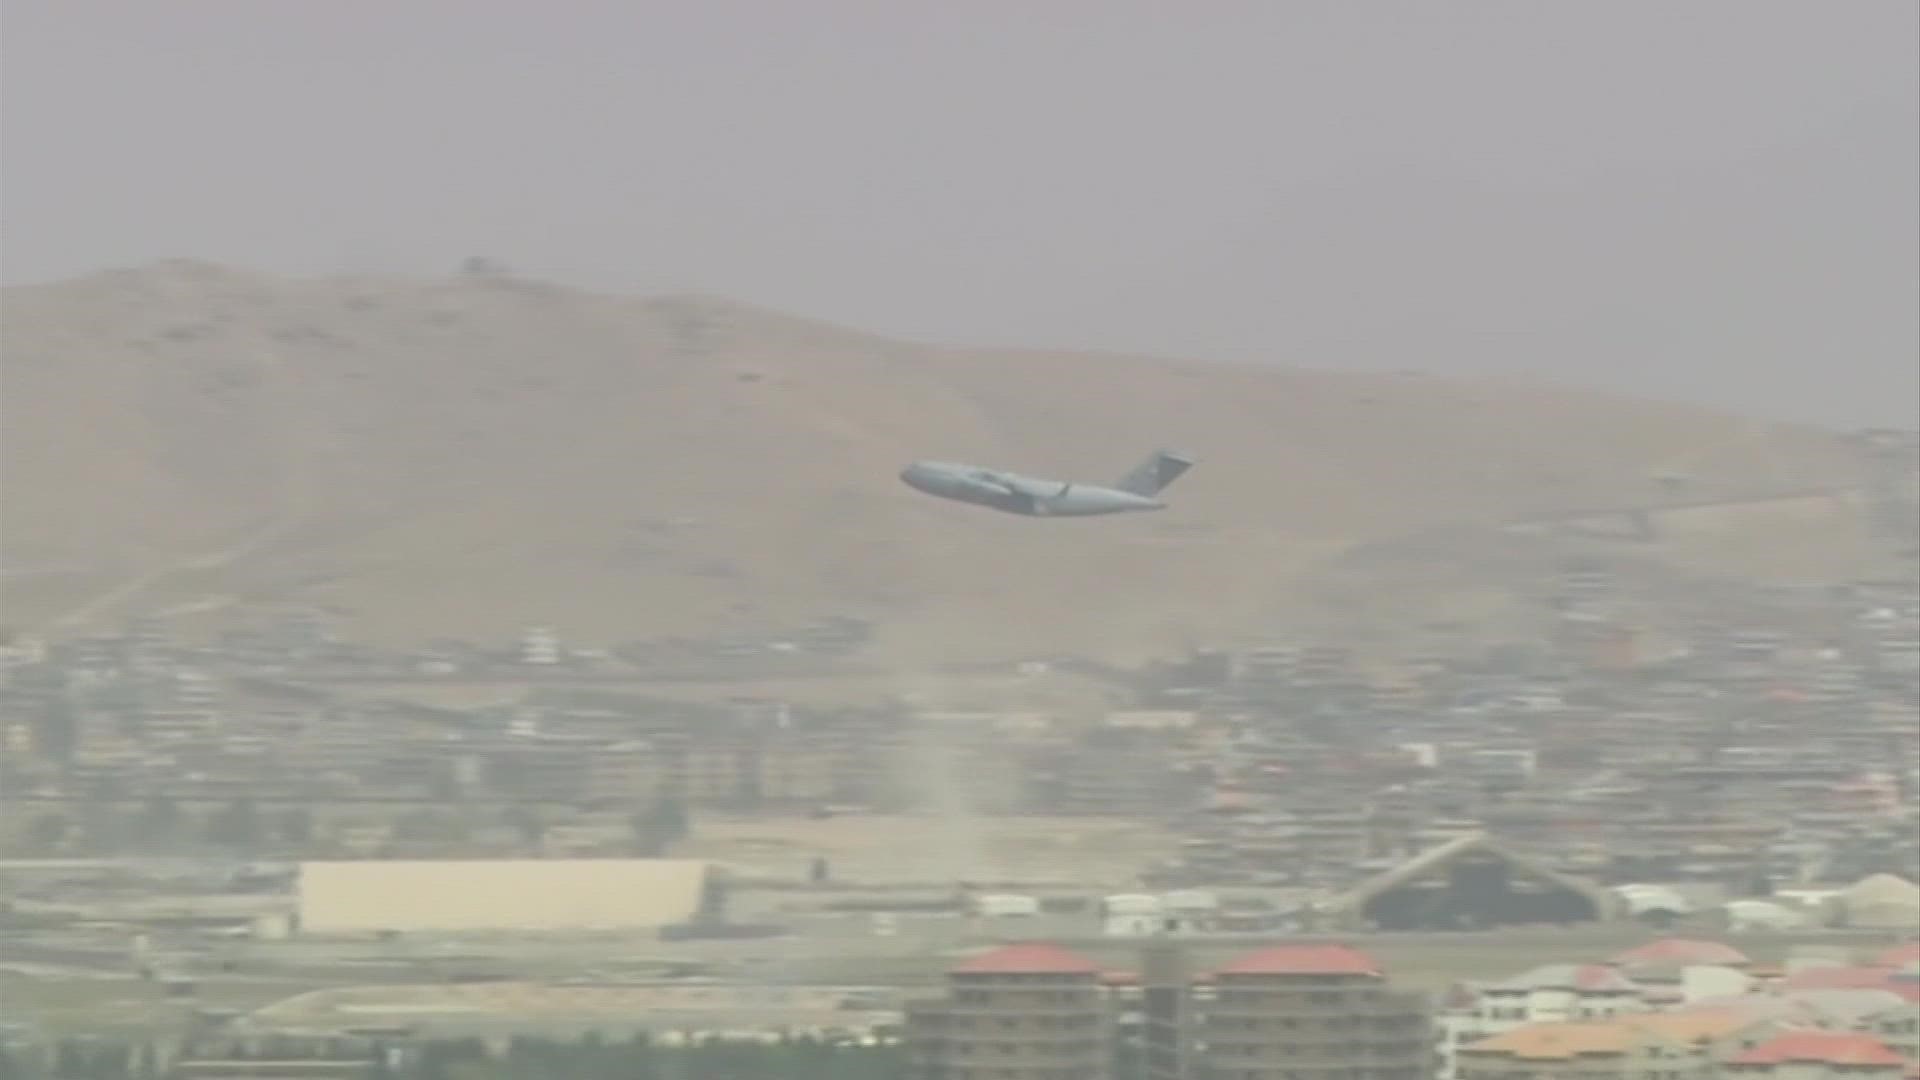 The last U.S. Air Force planes took off one minute before midnight in Kabul.